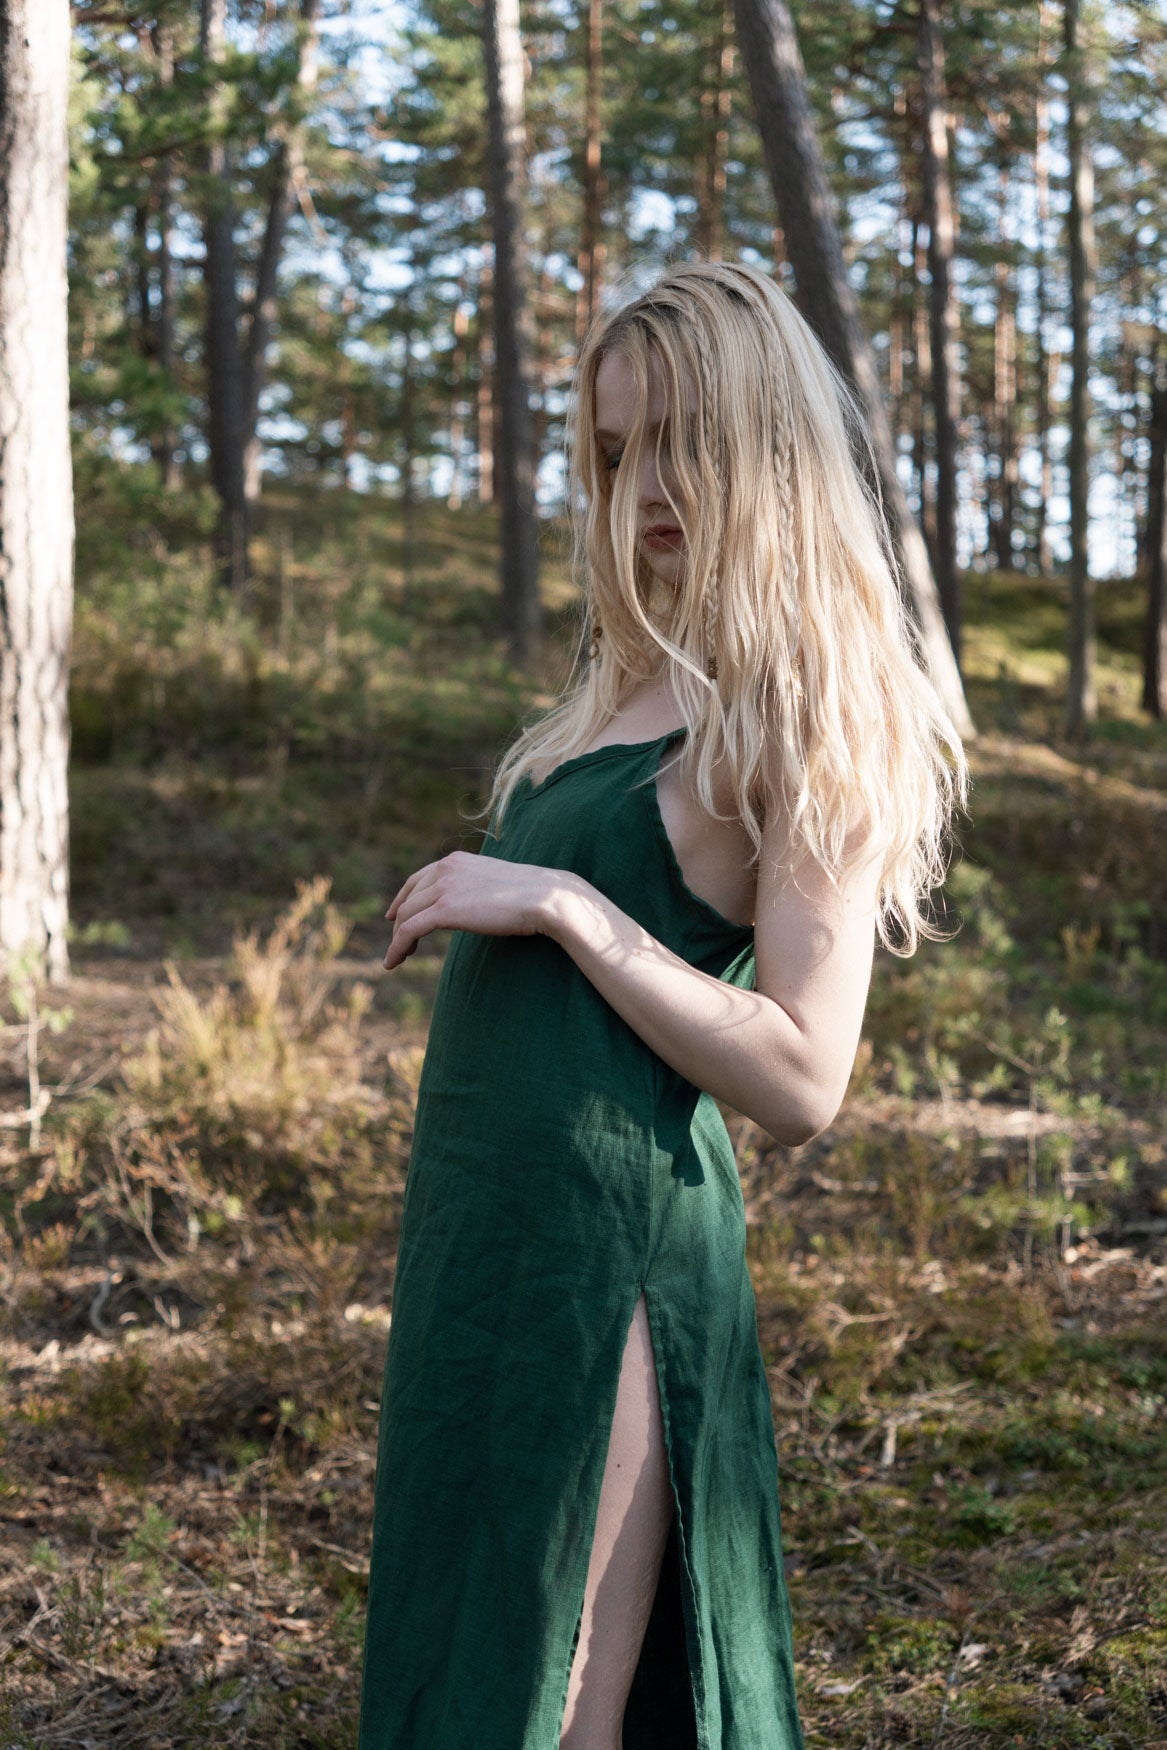 Organic, sustainable, sexy, long green linen nightwear slip dress with spaghetti straps and splits. This linen lingerie nightdress is natural, comfortable, soft and pure. This sleepwear nightgown is a conscious and healthy choice for your body and environment.